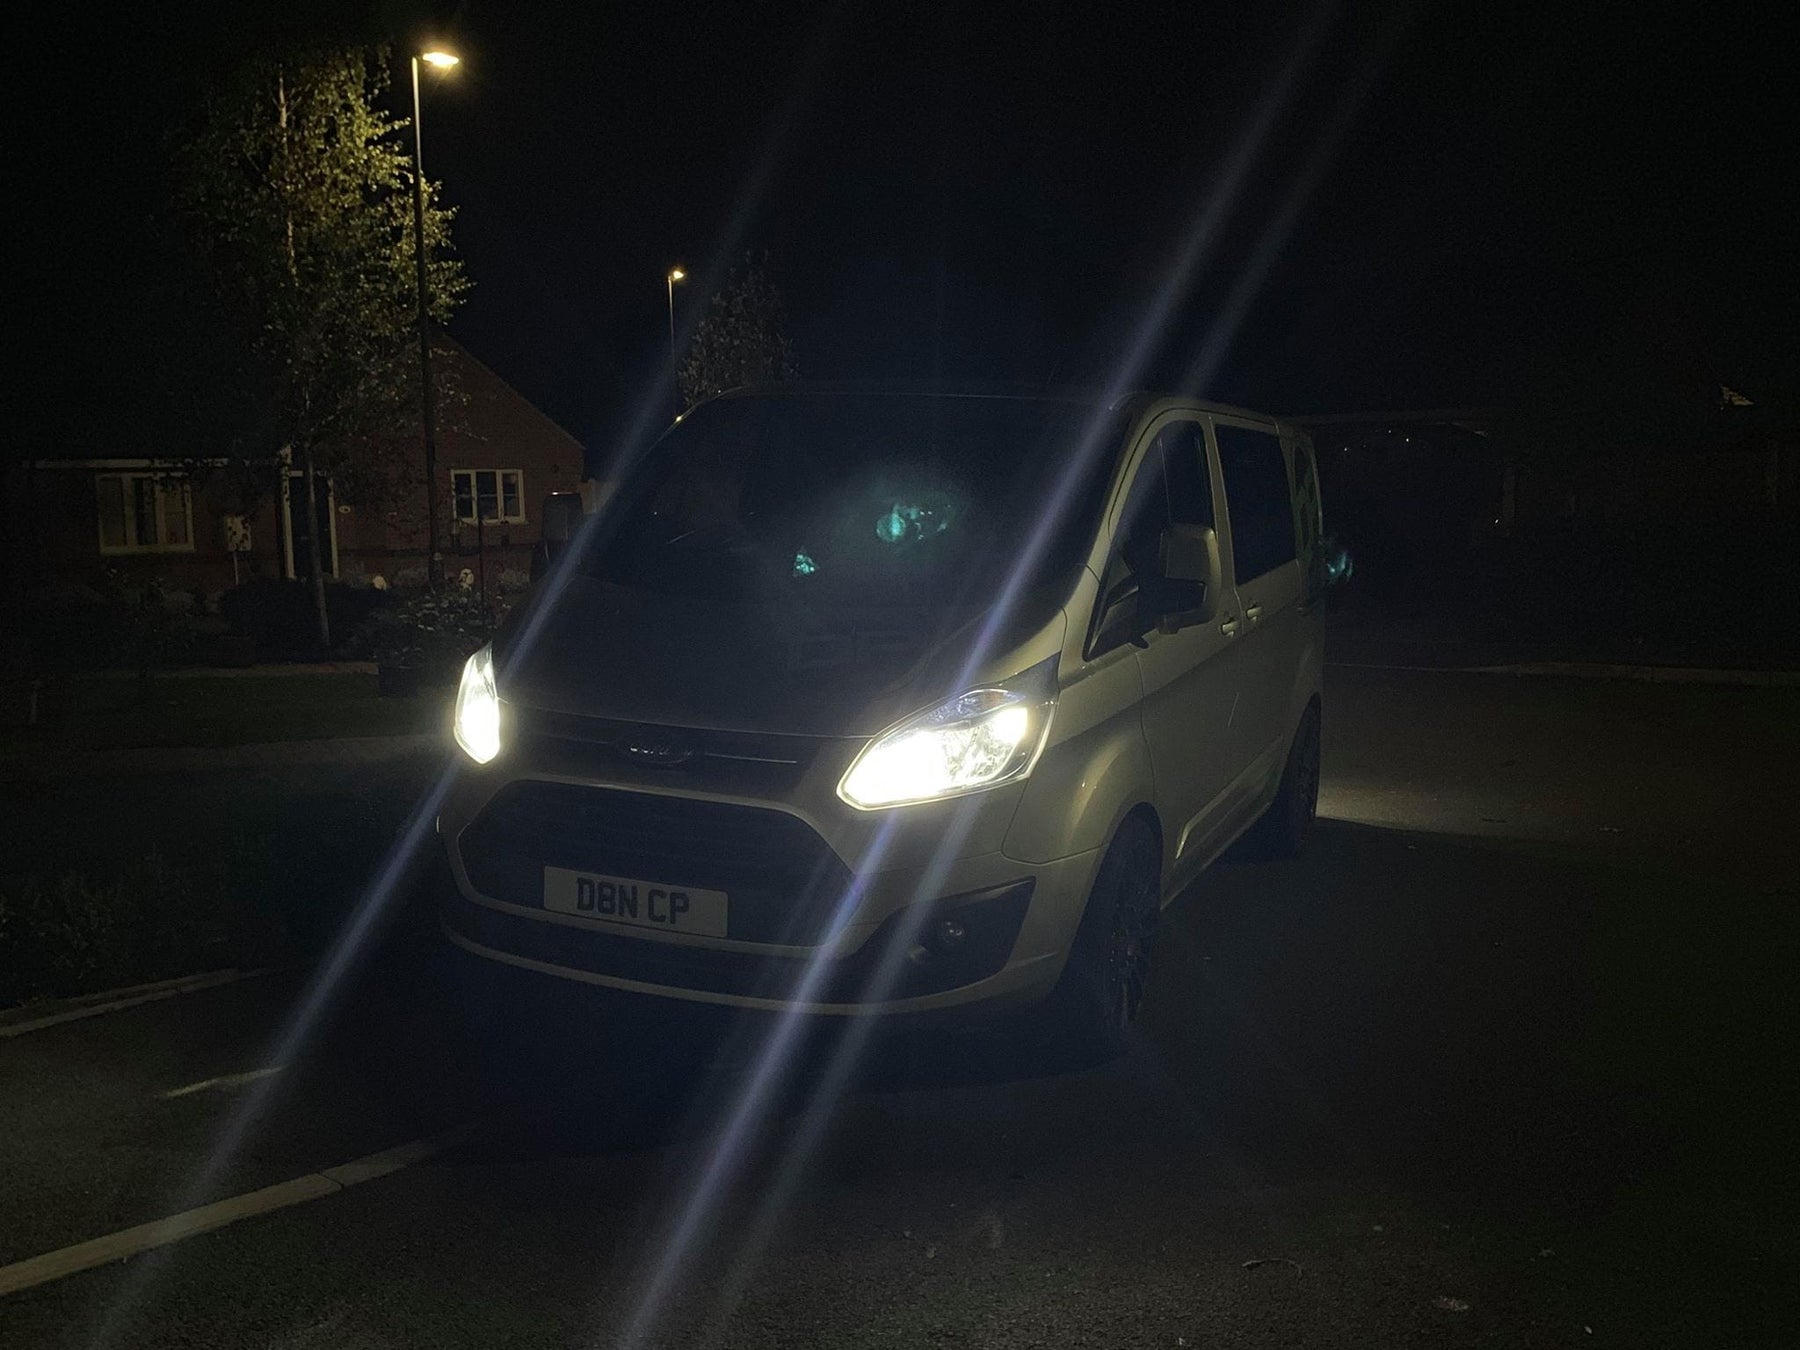 Ford Transit Custom Project-X LED Headlight Fitting Guide